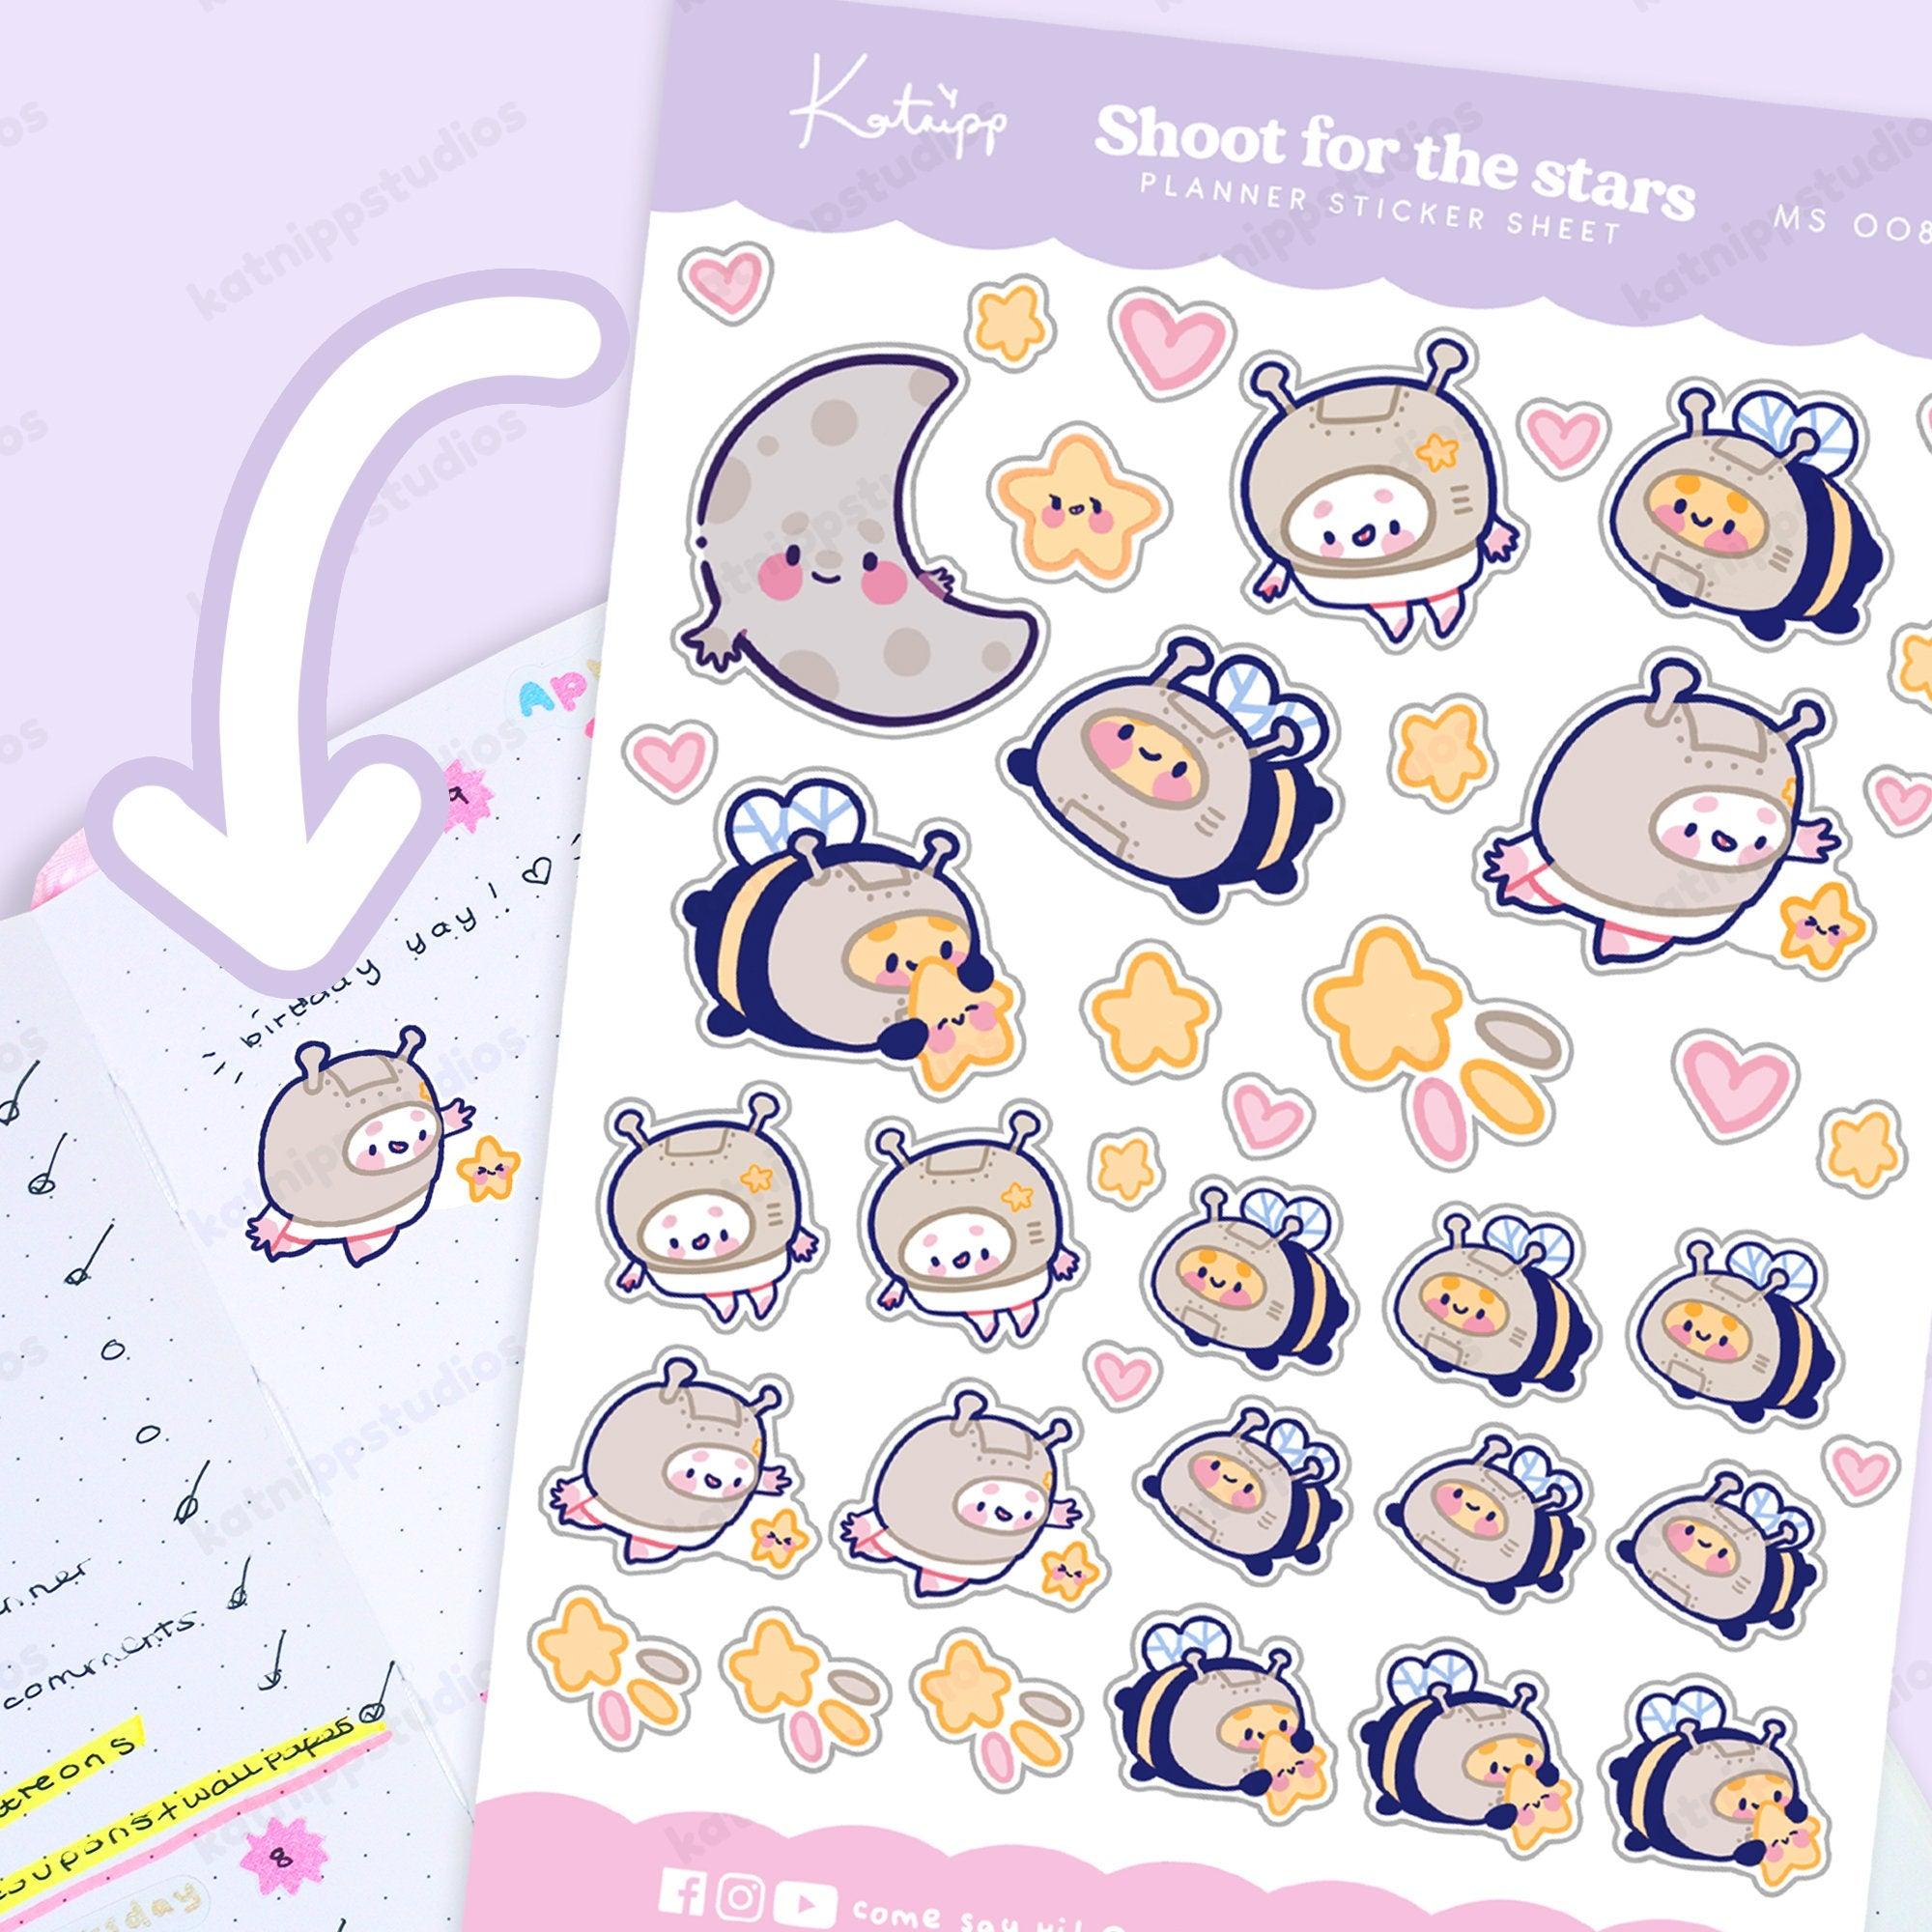 mage of Bumblebutt and Marshie celestial planner stickers (MS 008) on a white background.